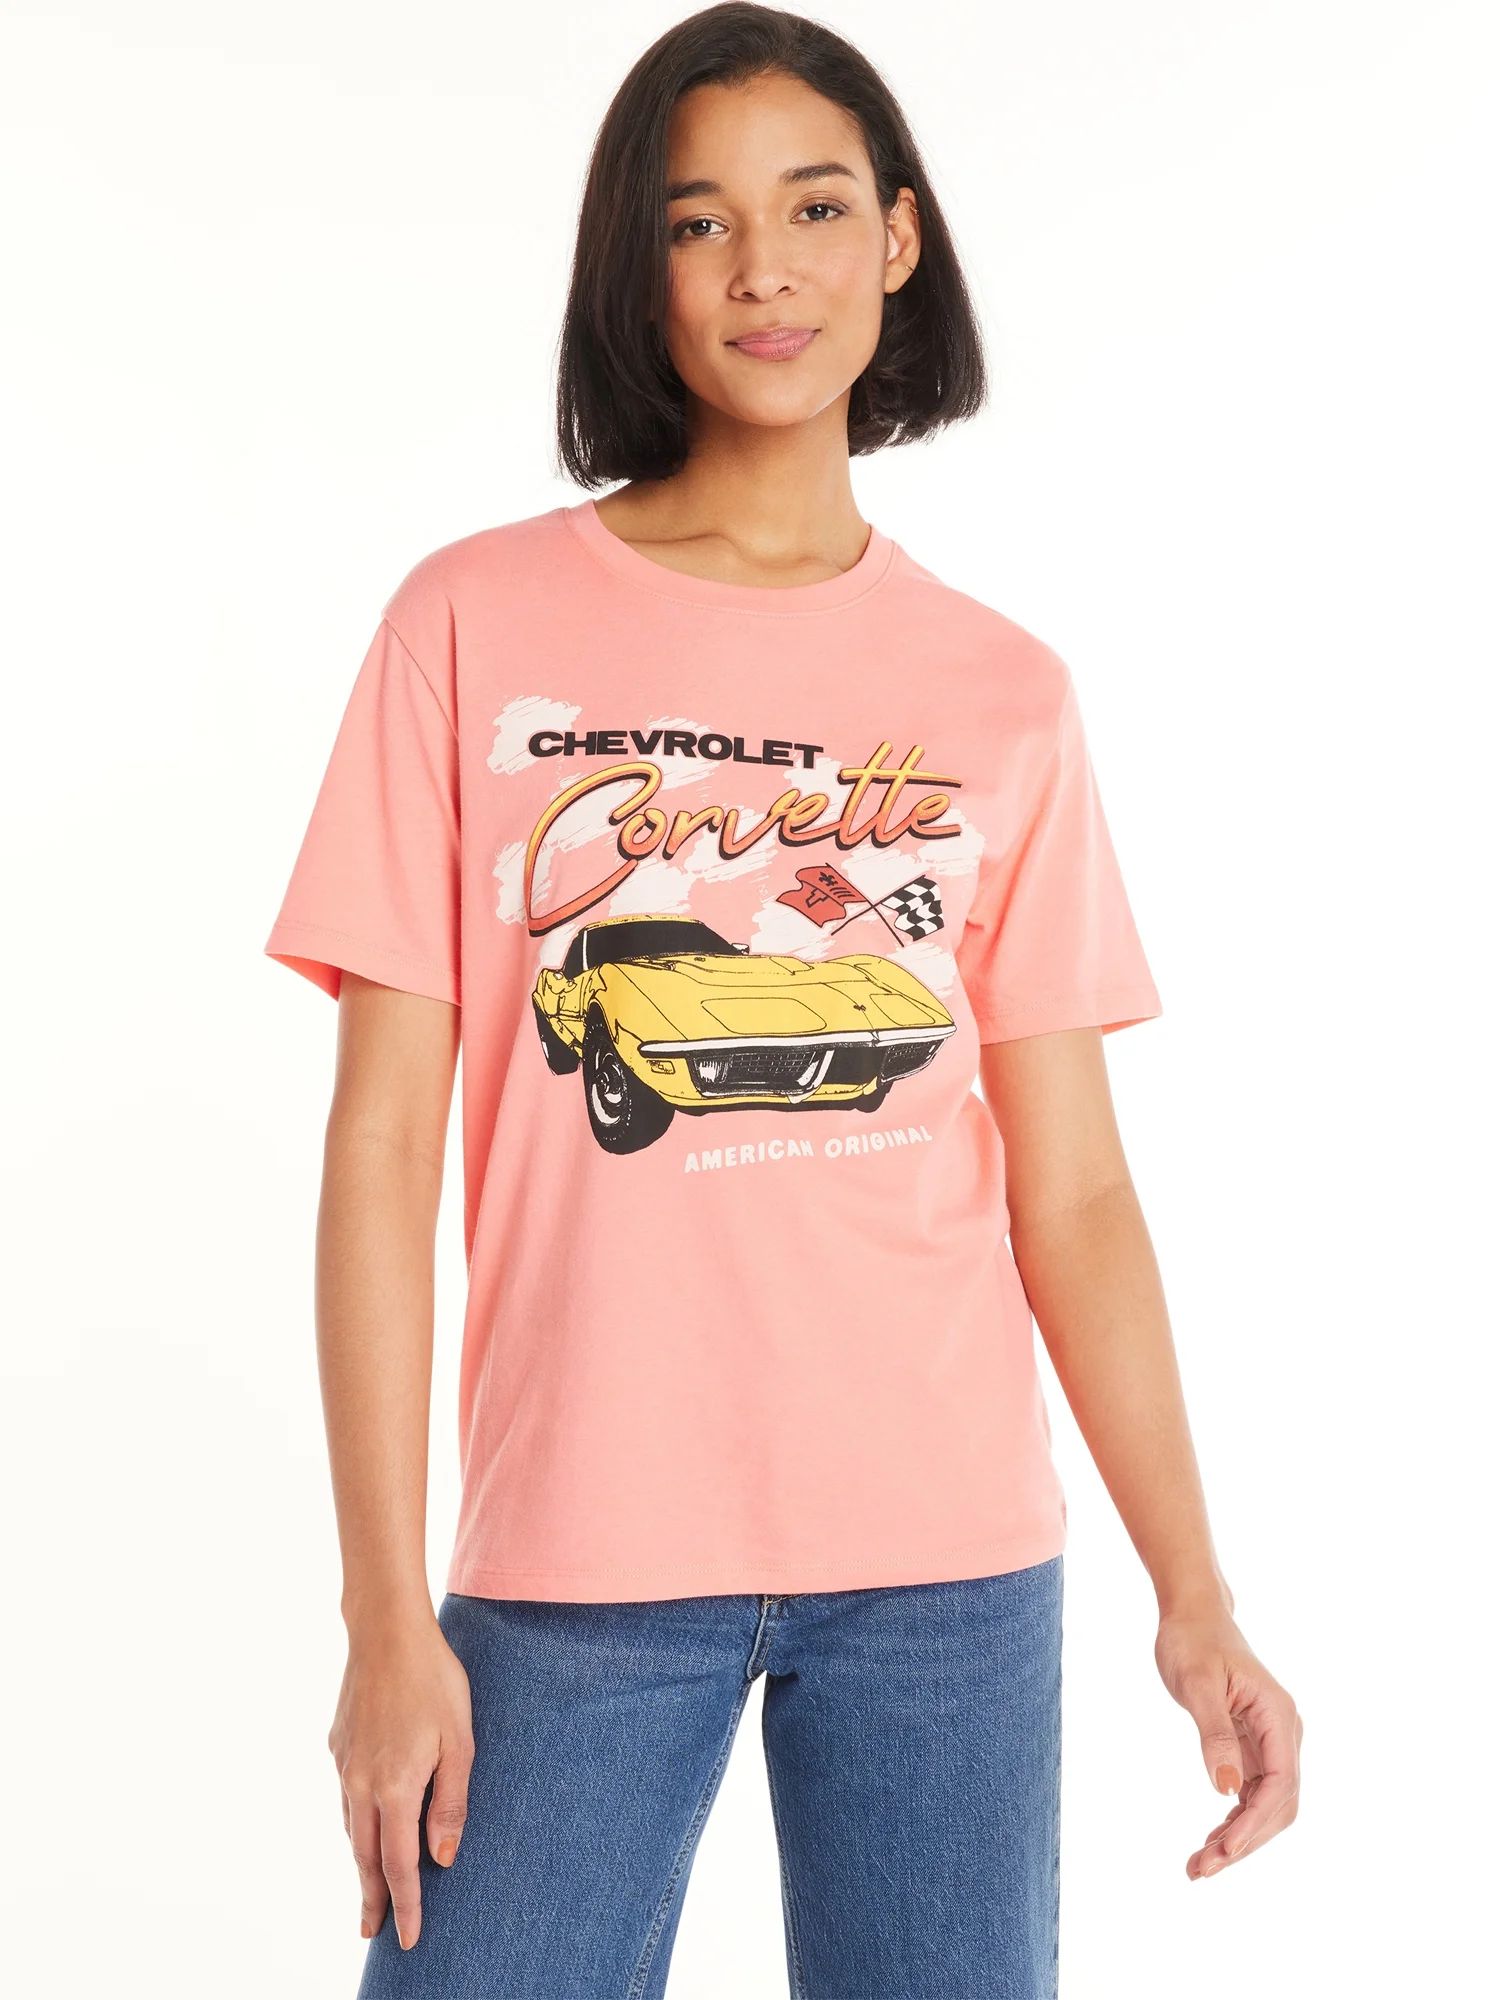 Time And Tru Women's Corvette Graphic Tee with Short Sleeves, Sizes XS-XXXL | Walmart (US)